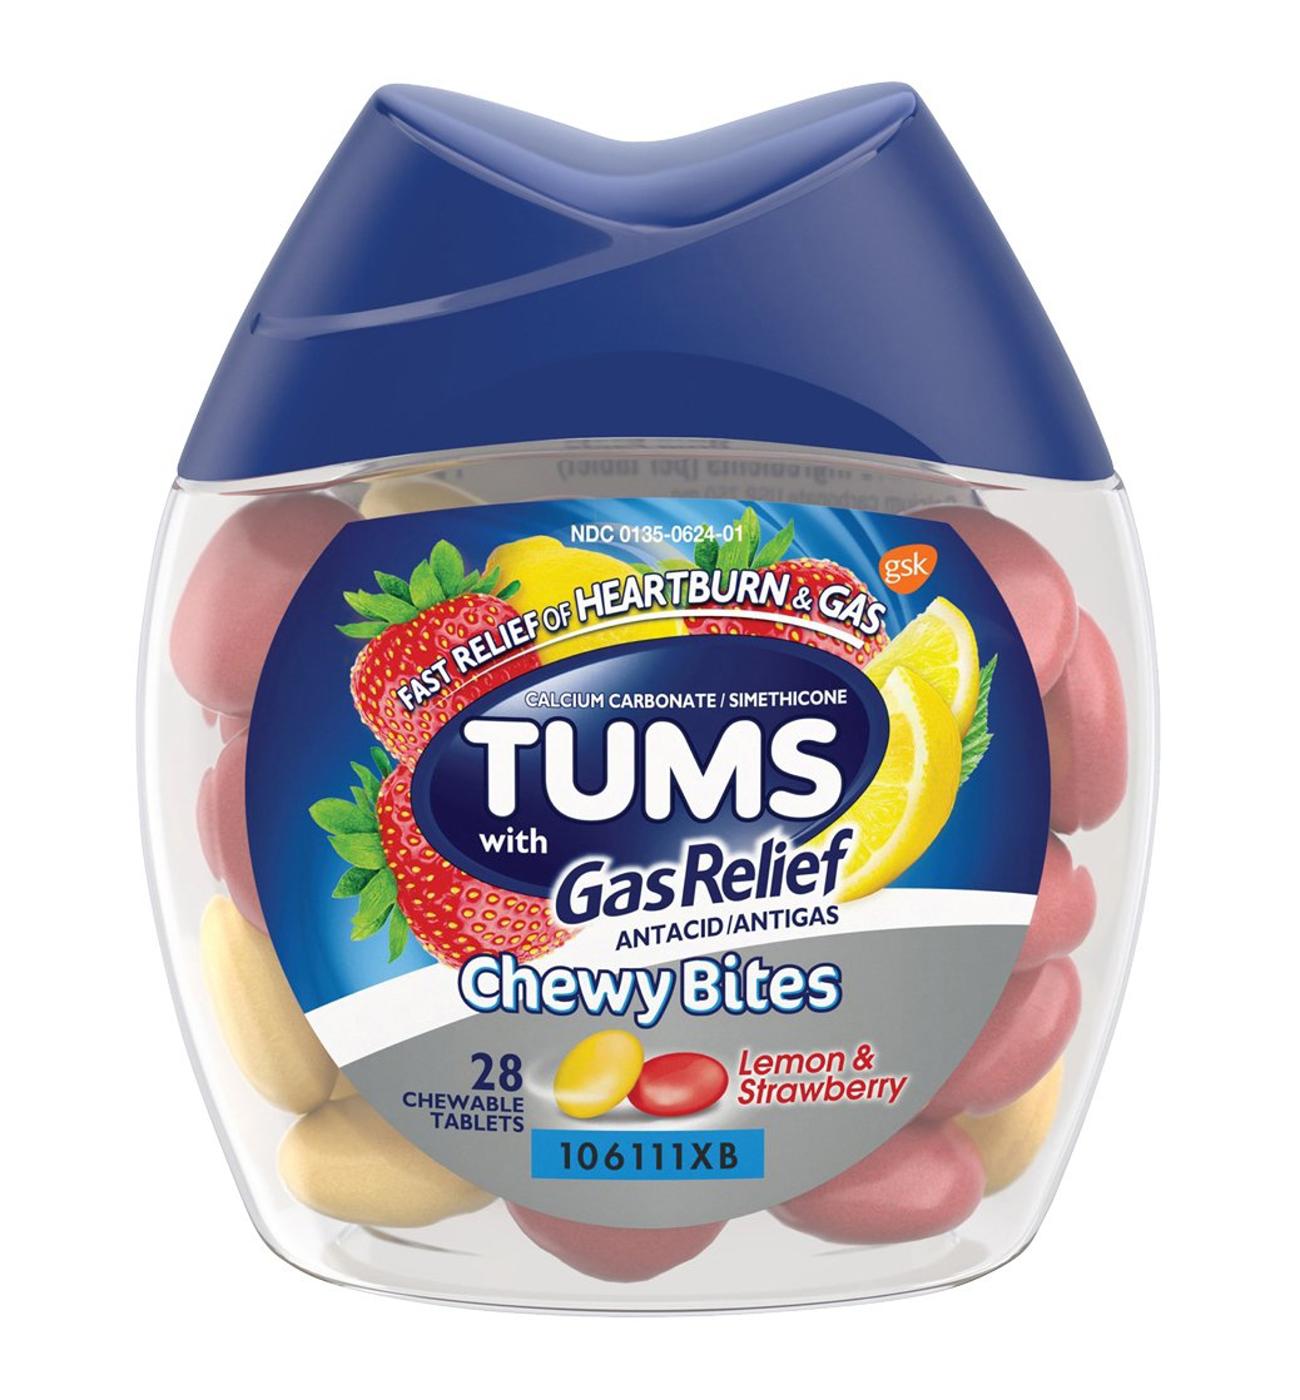 Tums Chewy Bites Lemon and Strawberry Antacid Tablets; image 3 of 8